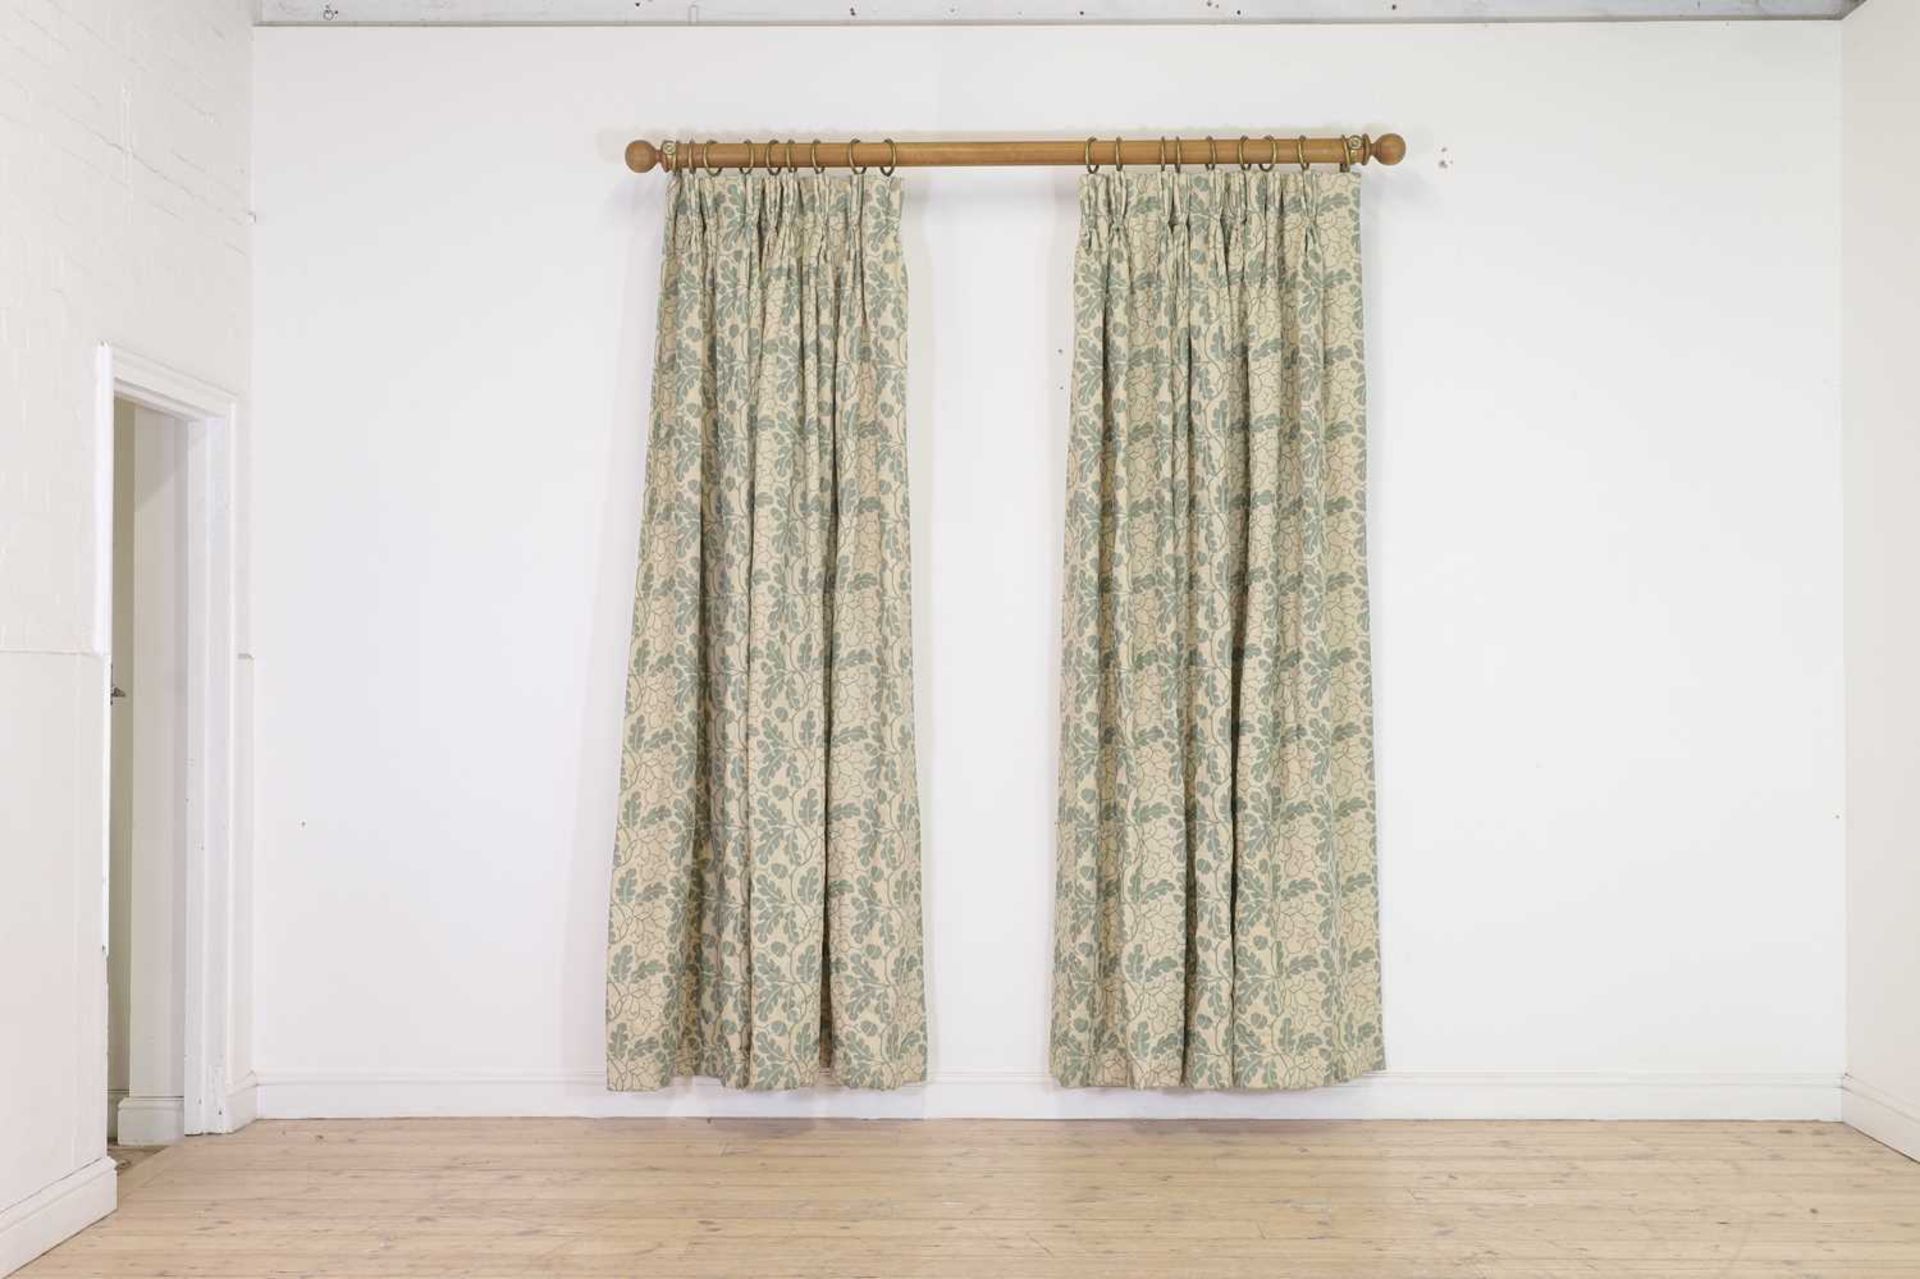 Two pairs of 'Oak Leaves' curtains by Robert Kime, - Image 2 of 14